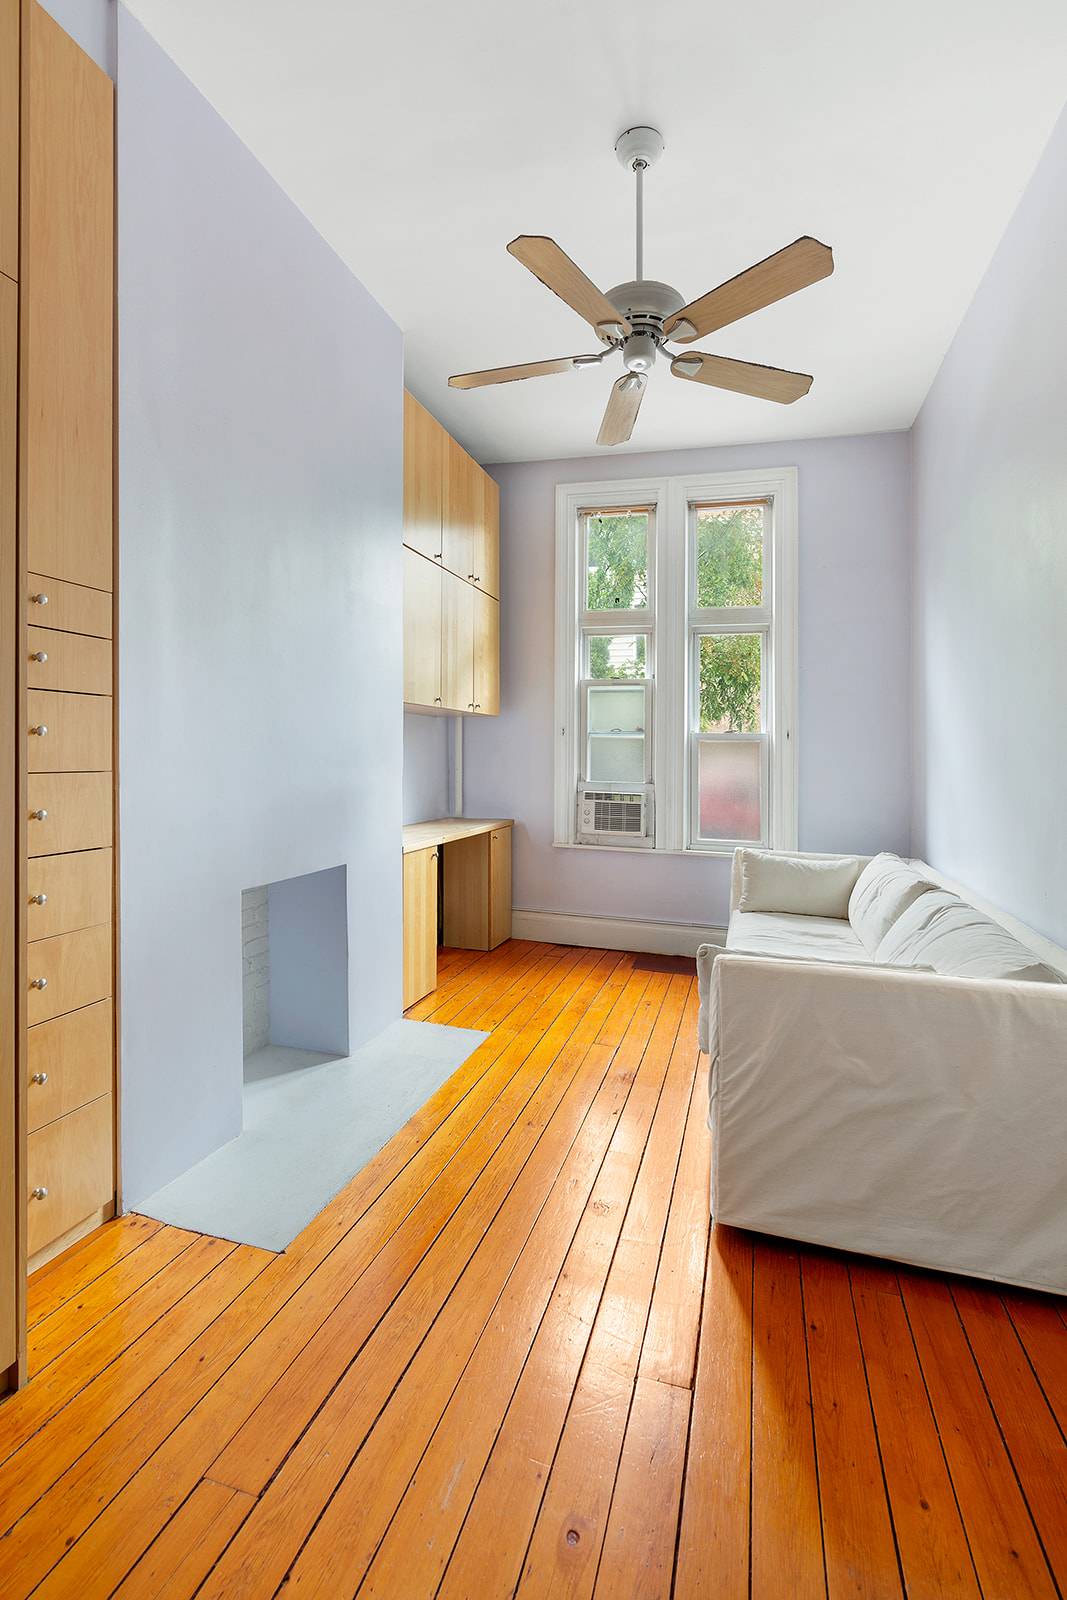 This generously sized pre war one bedroom 1BR home in original condition, is ideally situated at 152 North 9th Street, a desirable residential block in Northside Williamsburg !